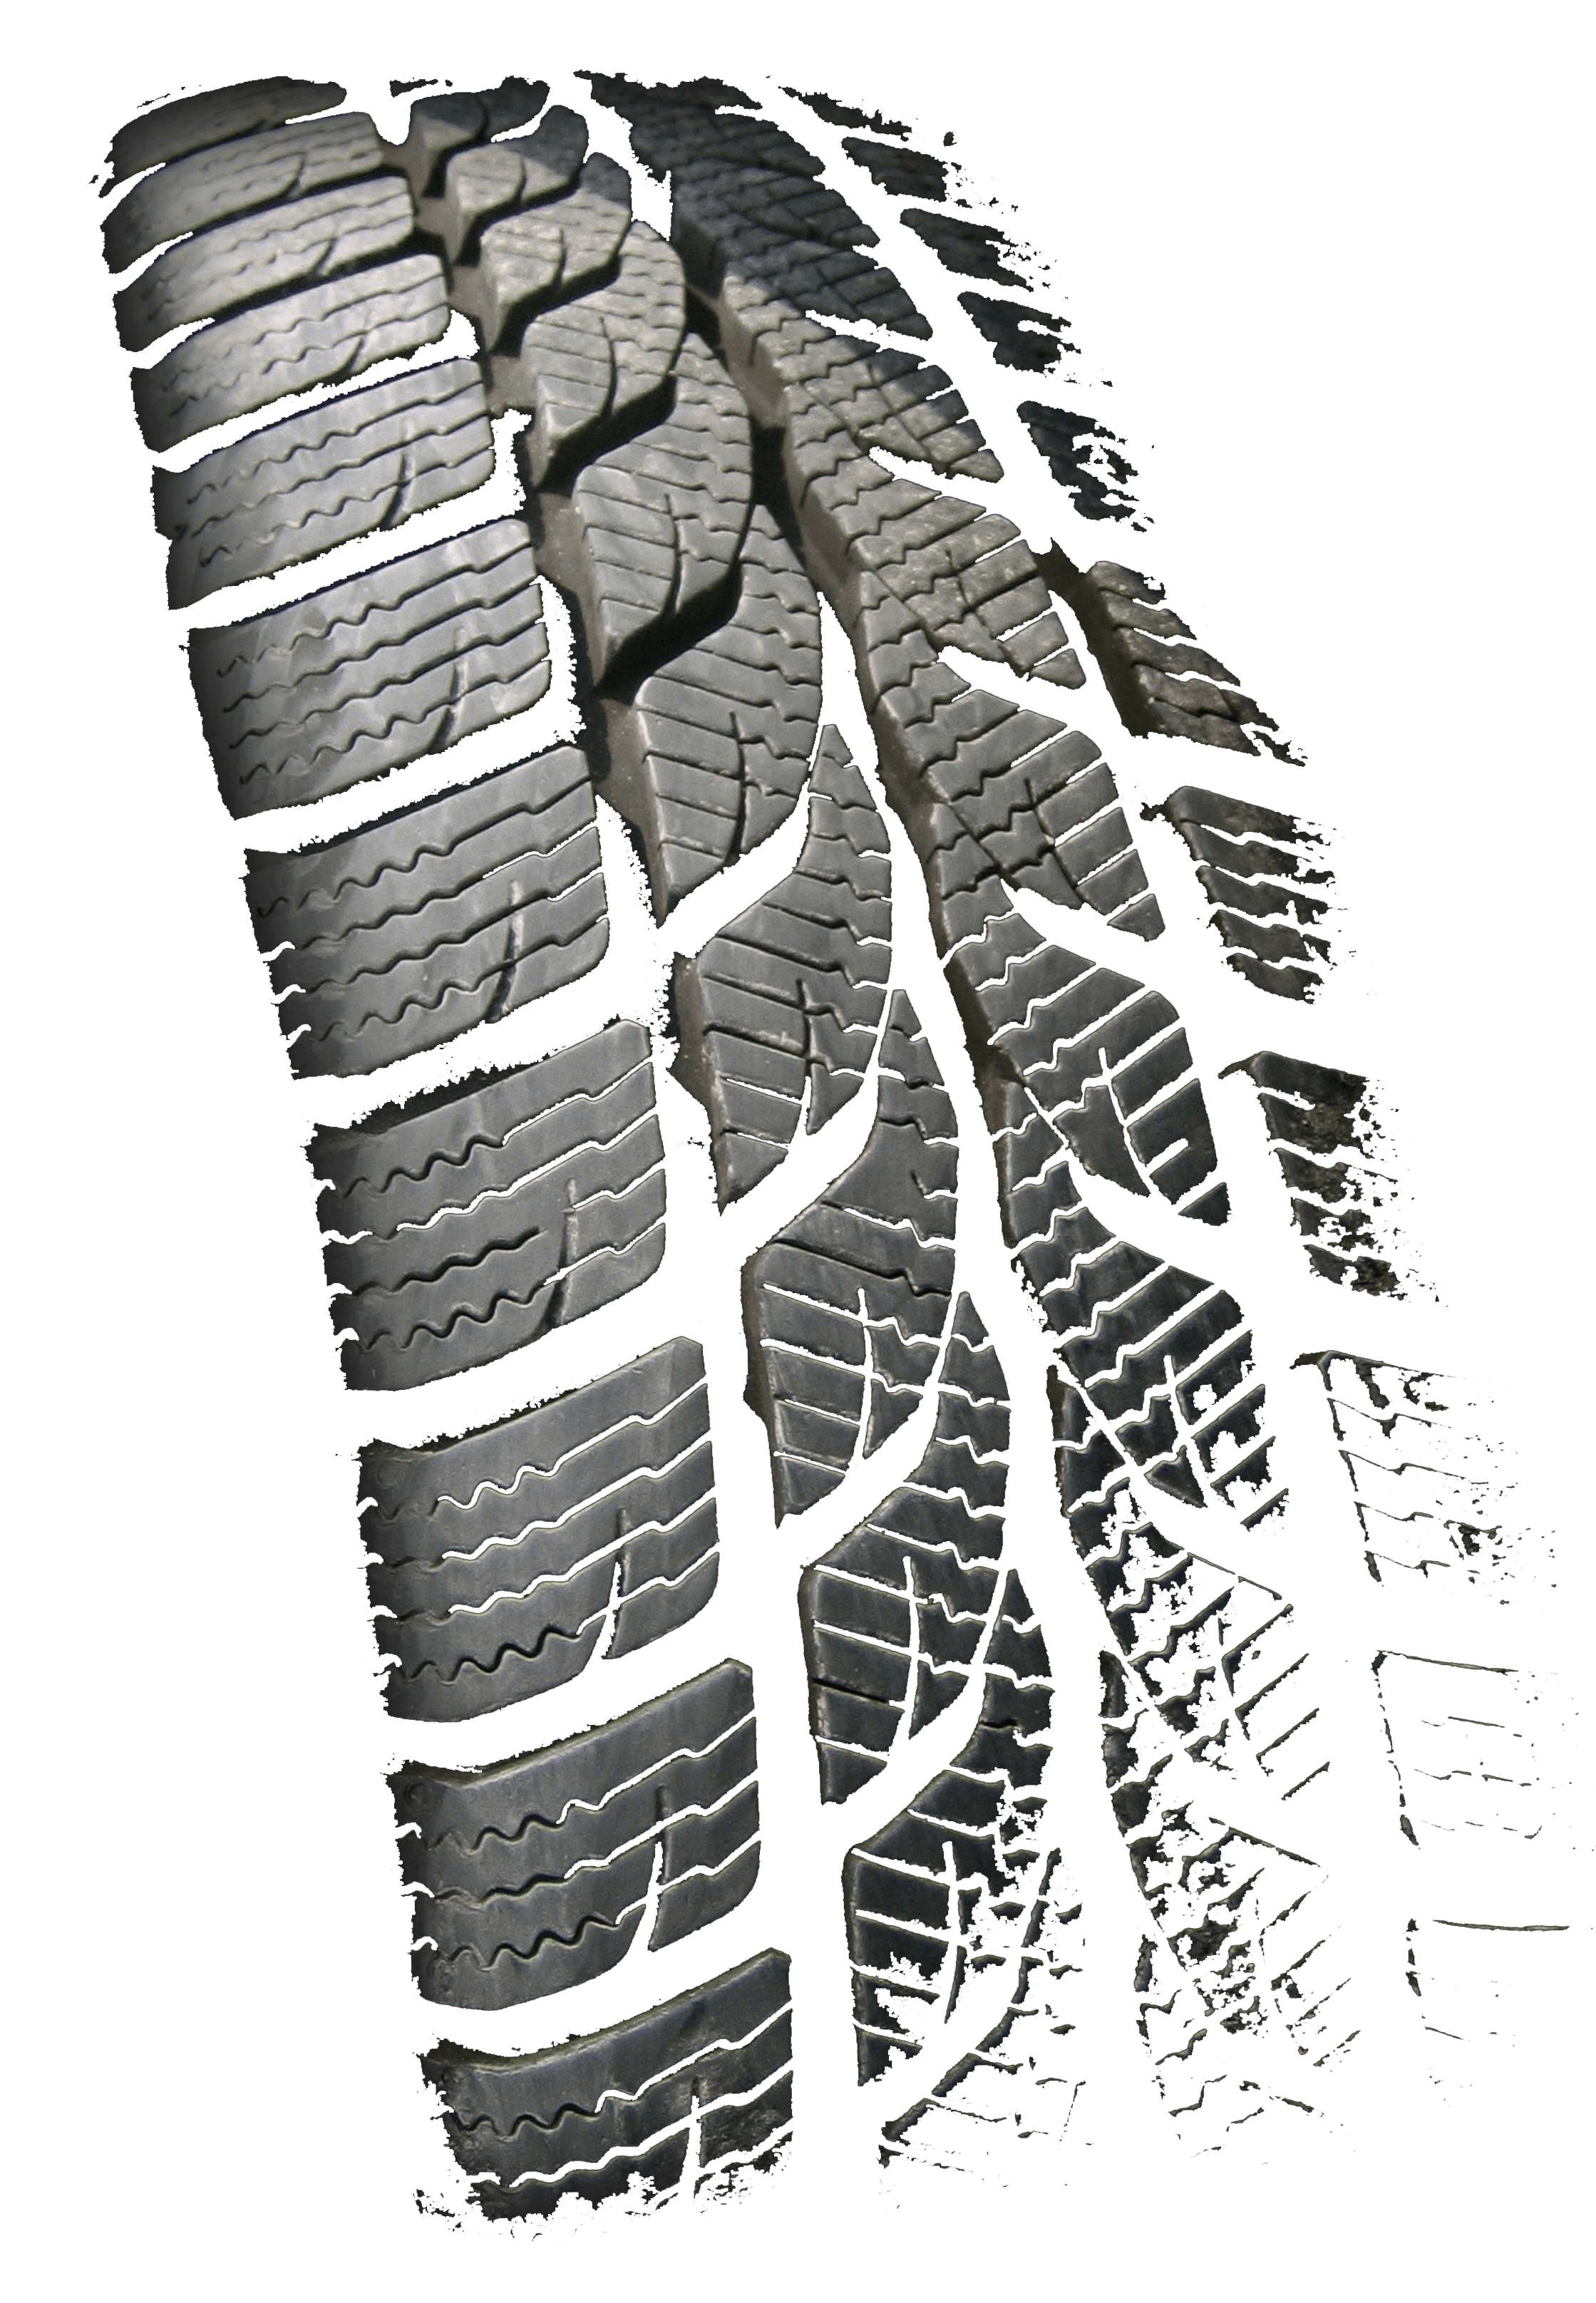 Tire Marks Png | www.pixshark.com - Images Galleries With ...